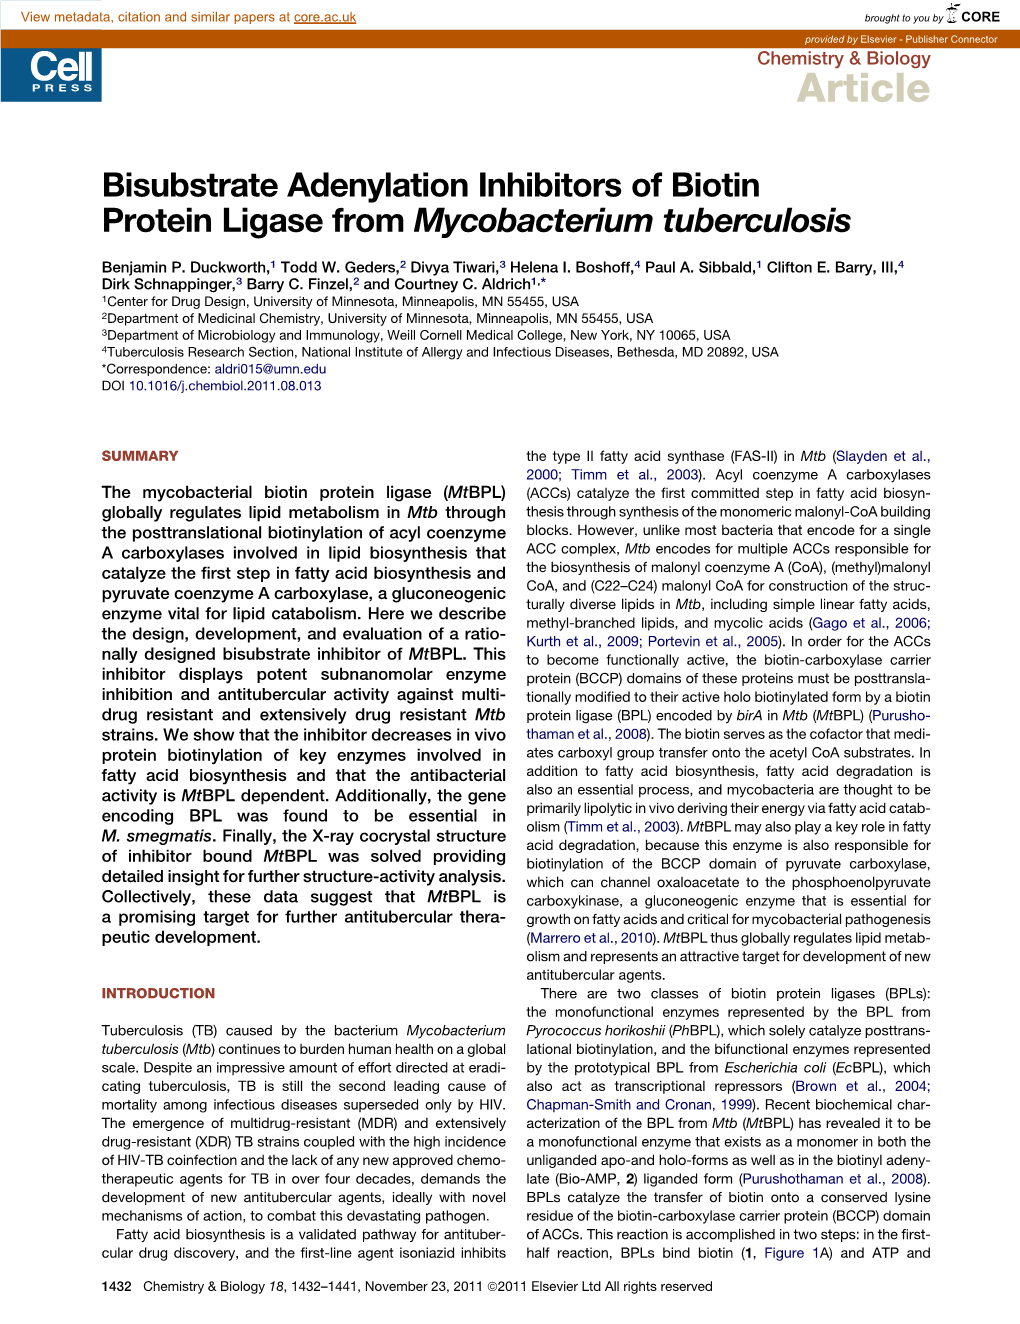 Bisubstrate Adenylation Inhibitors of Biotin Protein Ligase from Mycobacterium Tuberculosis